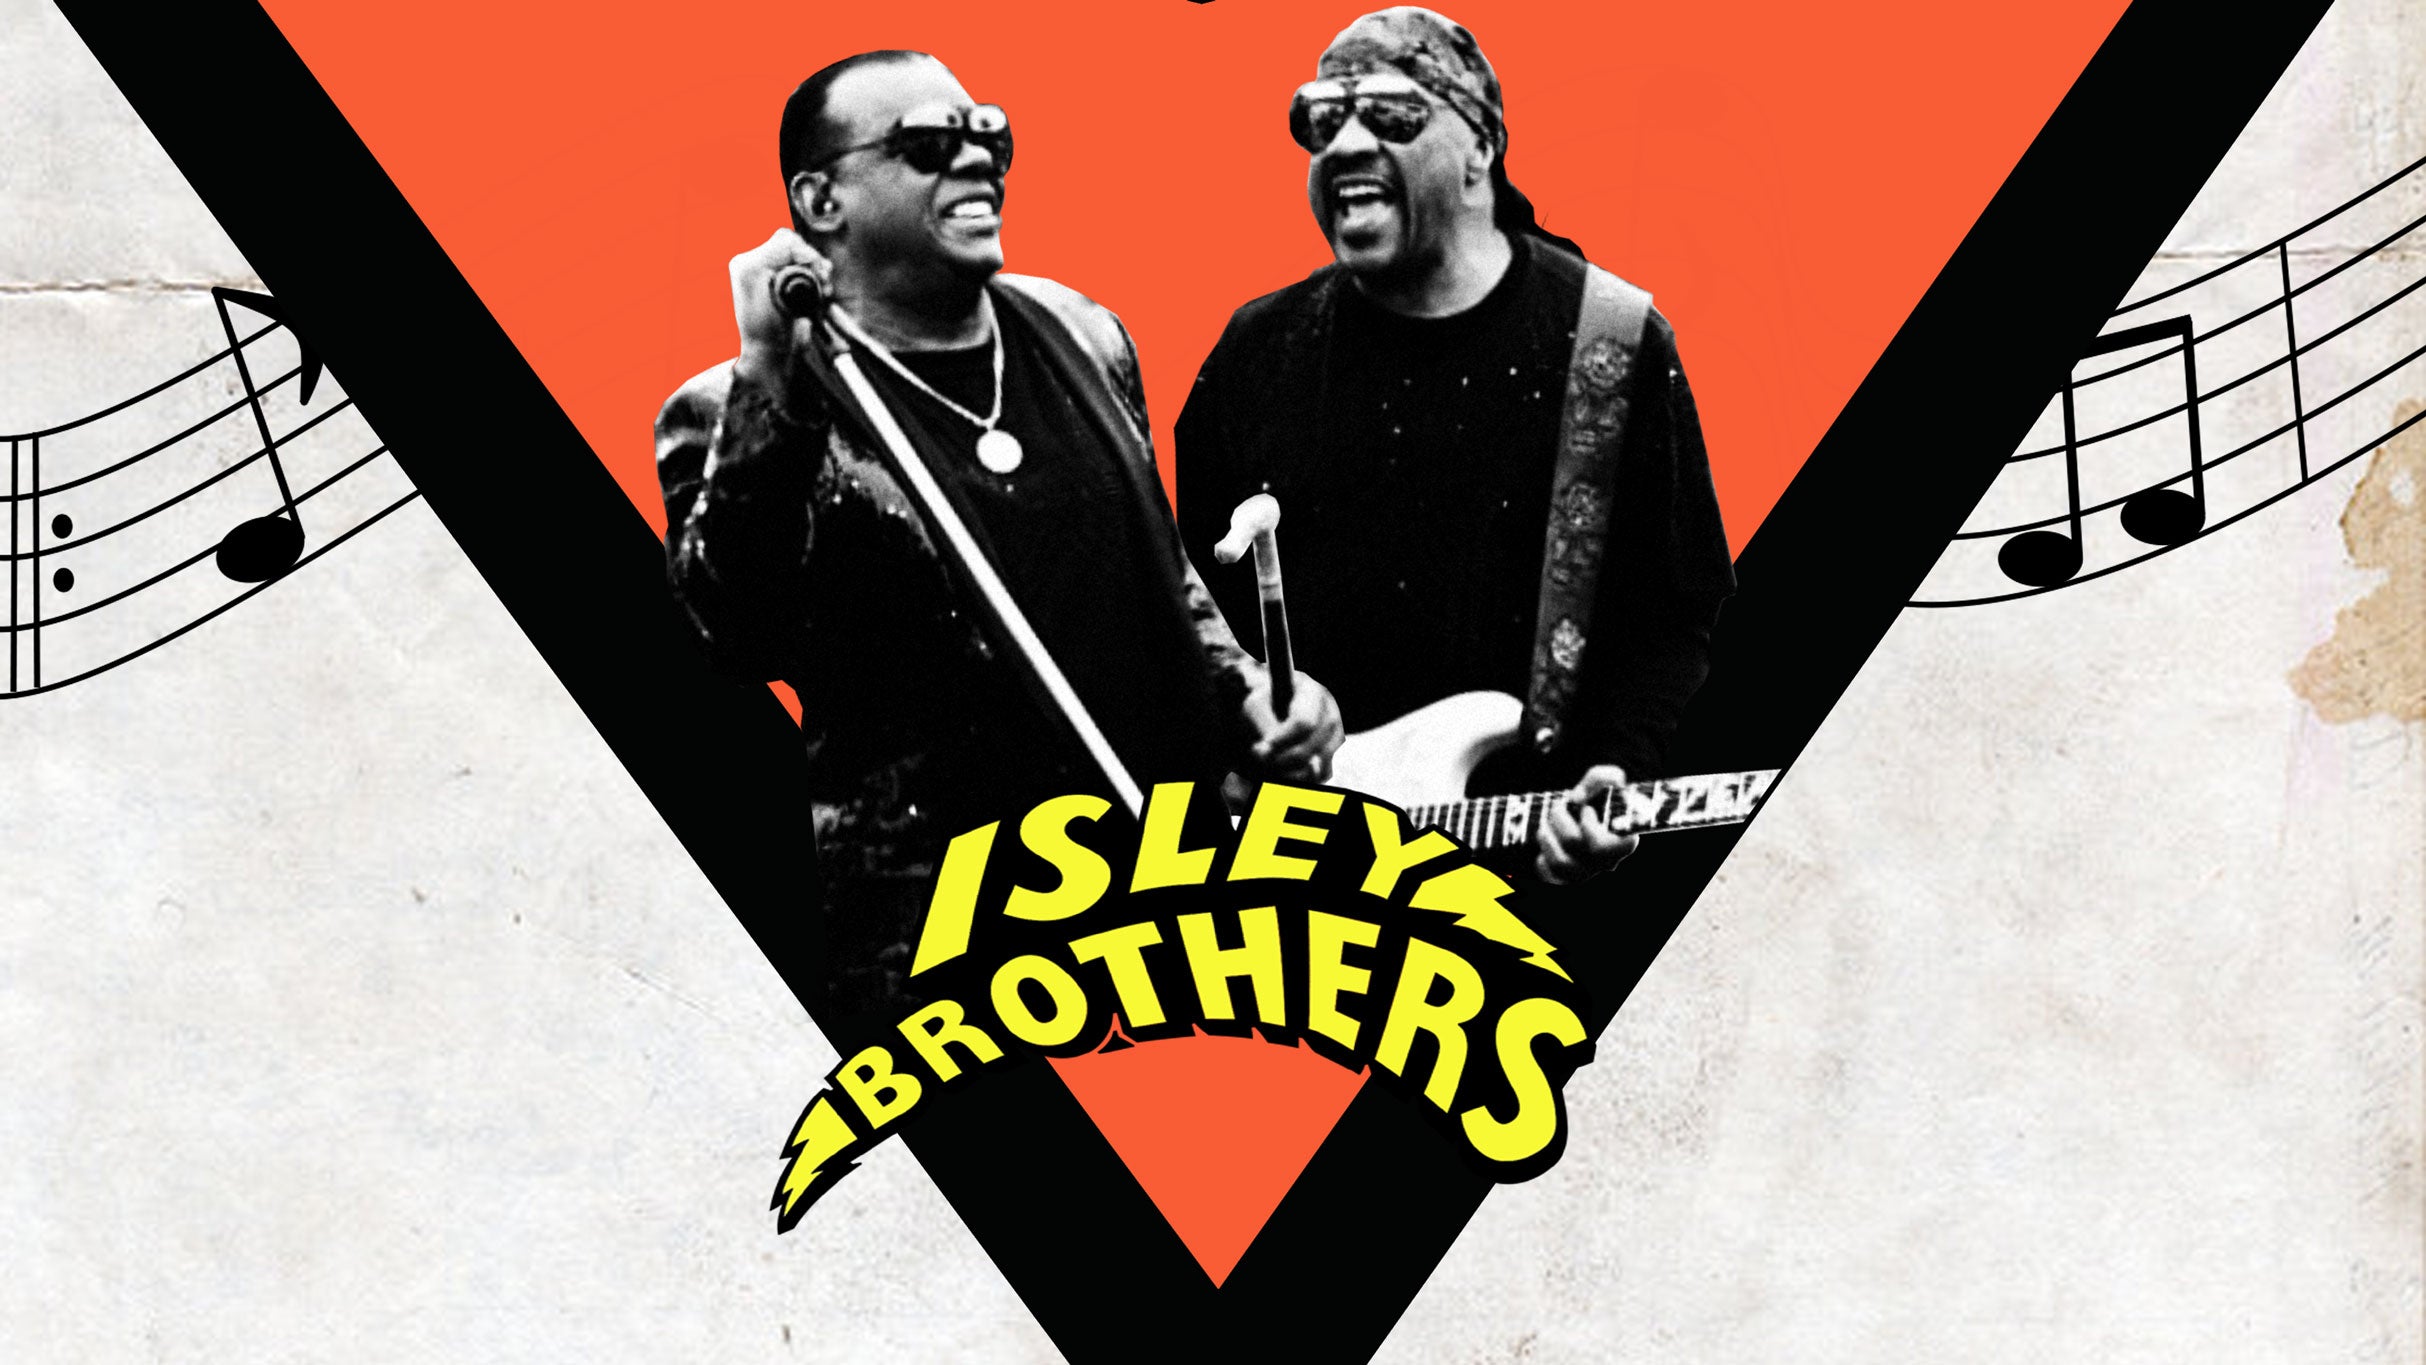 Isley Brothers at Kings Theatre